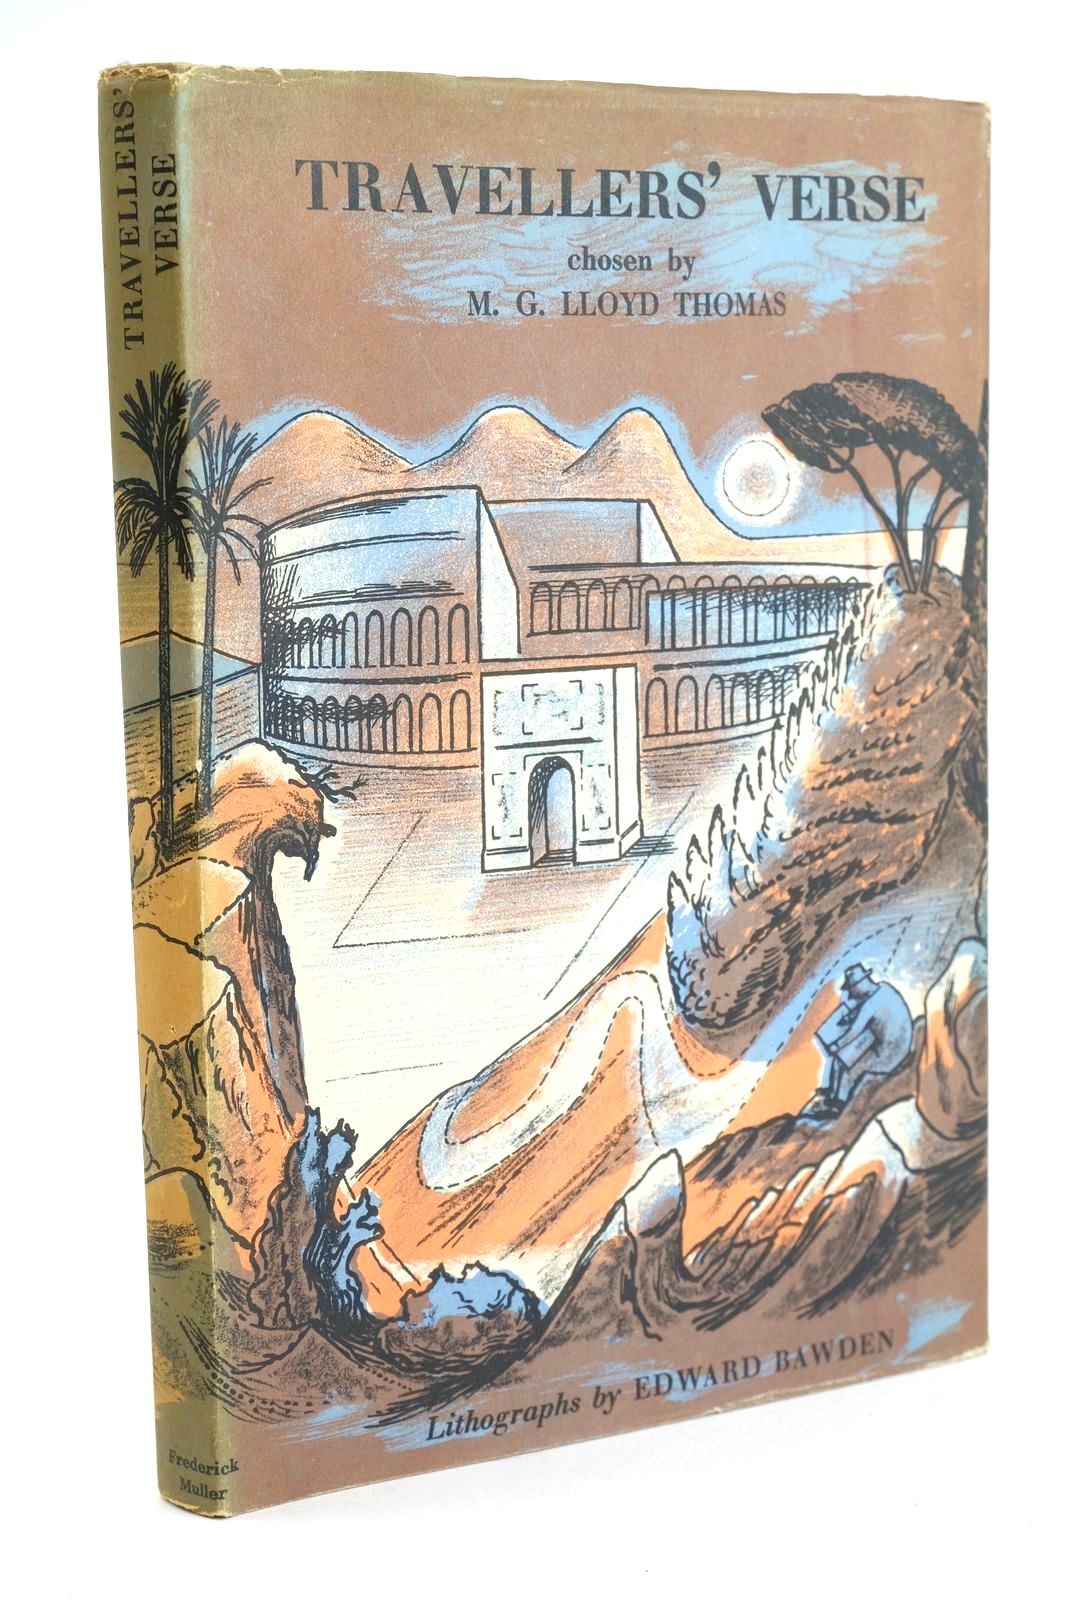 Photo of TRAVELLERS' VERSE written by Thomas, M.G. Lloyd illustrated by Bawden, Edward published by Frederick Muller Ltd. (STOCK CODE: 1323727)  for sale by Stella & Rose's Books